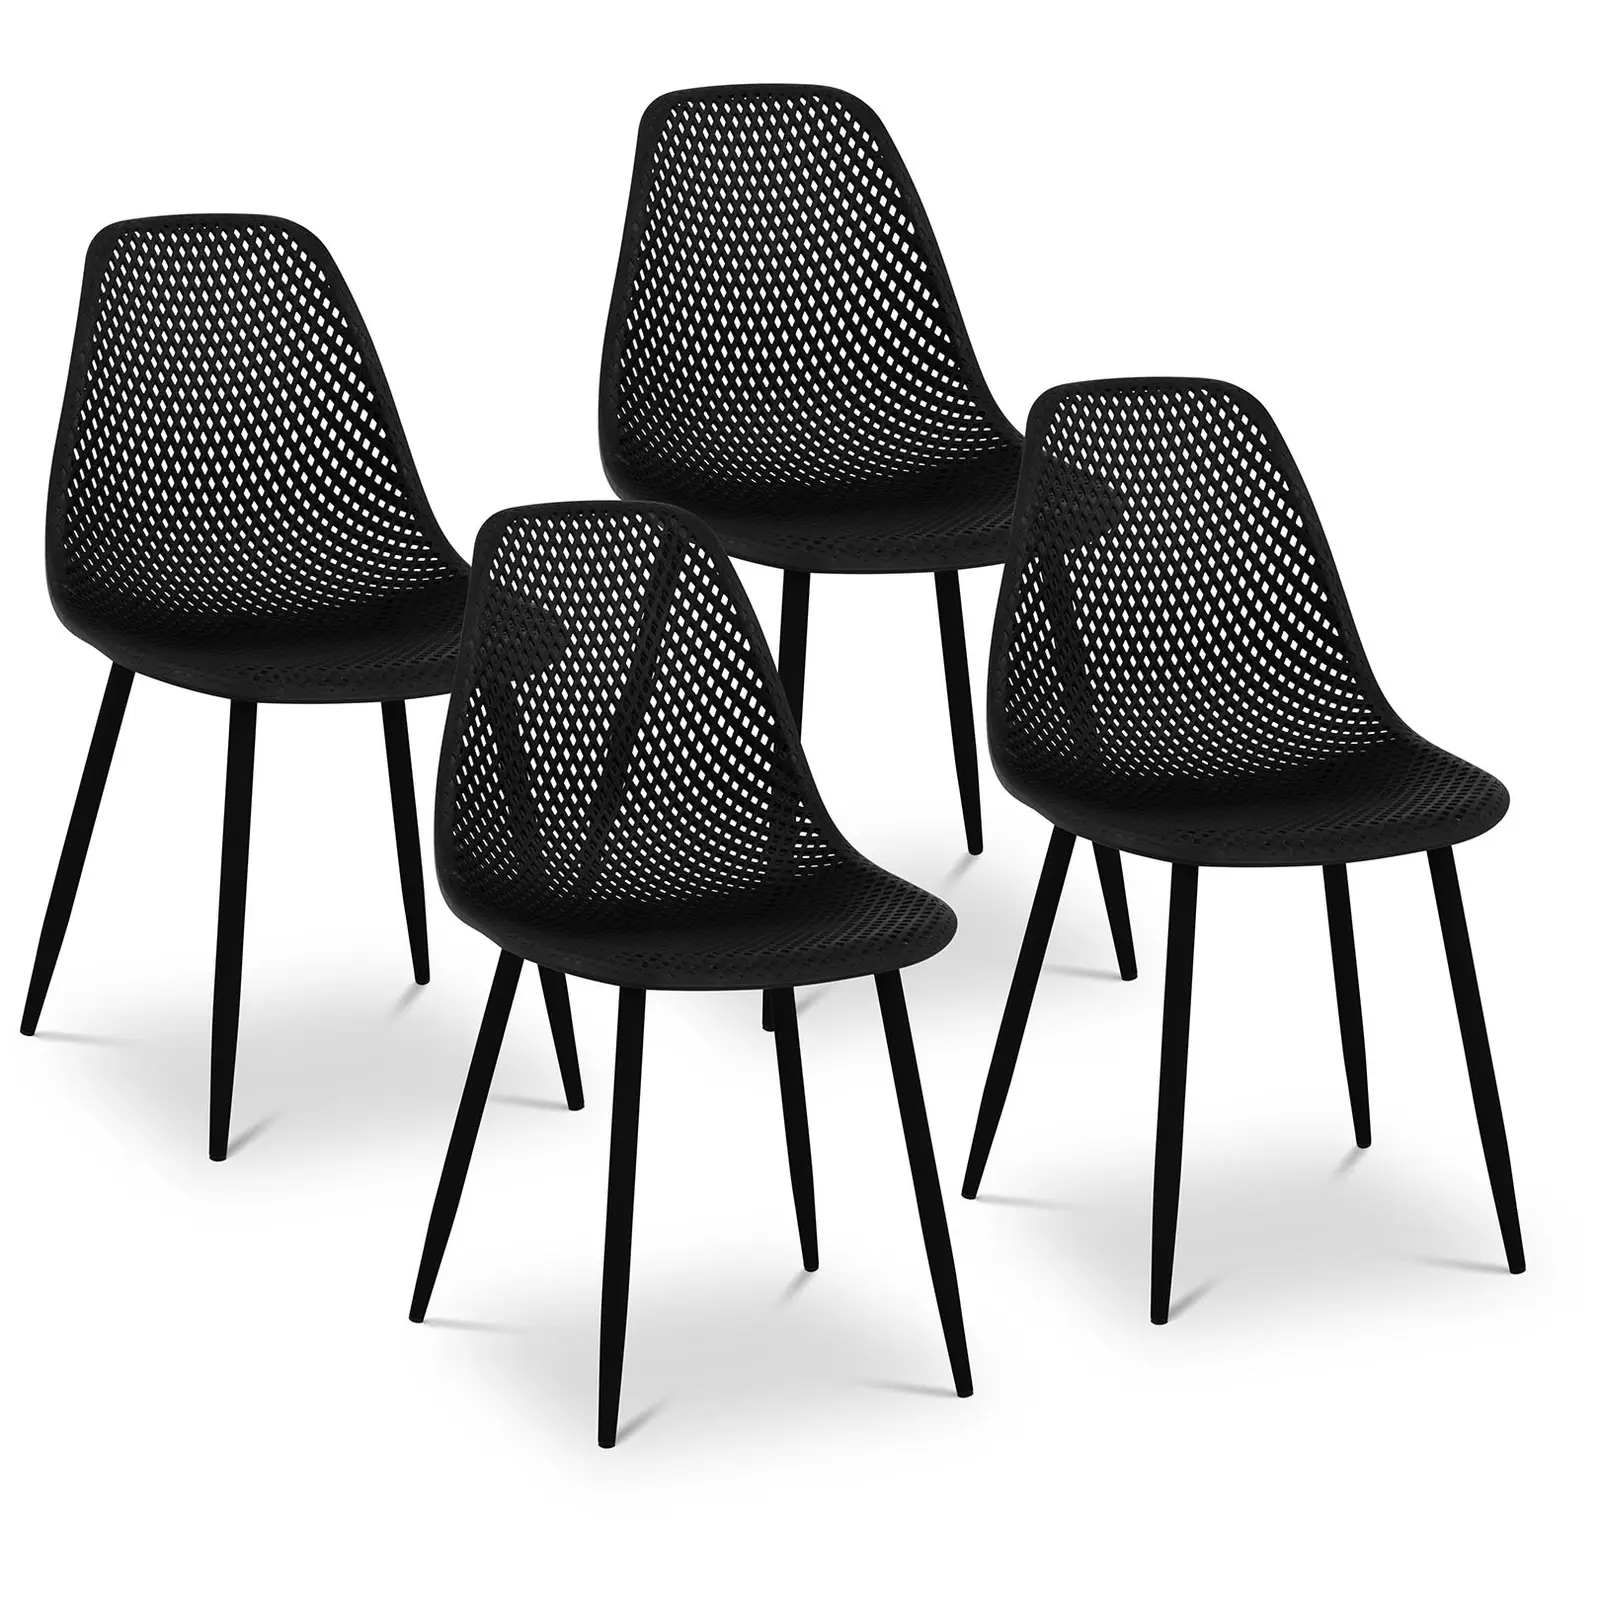 Factory second Chair - set of 4 - up to 150 kg - seat 52 x 46.5 cm - black